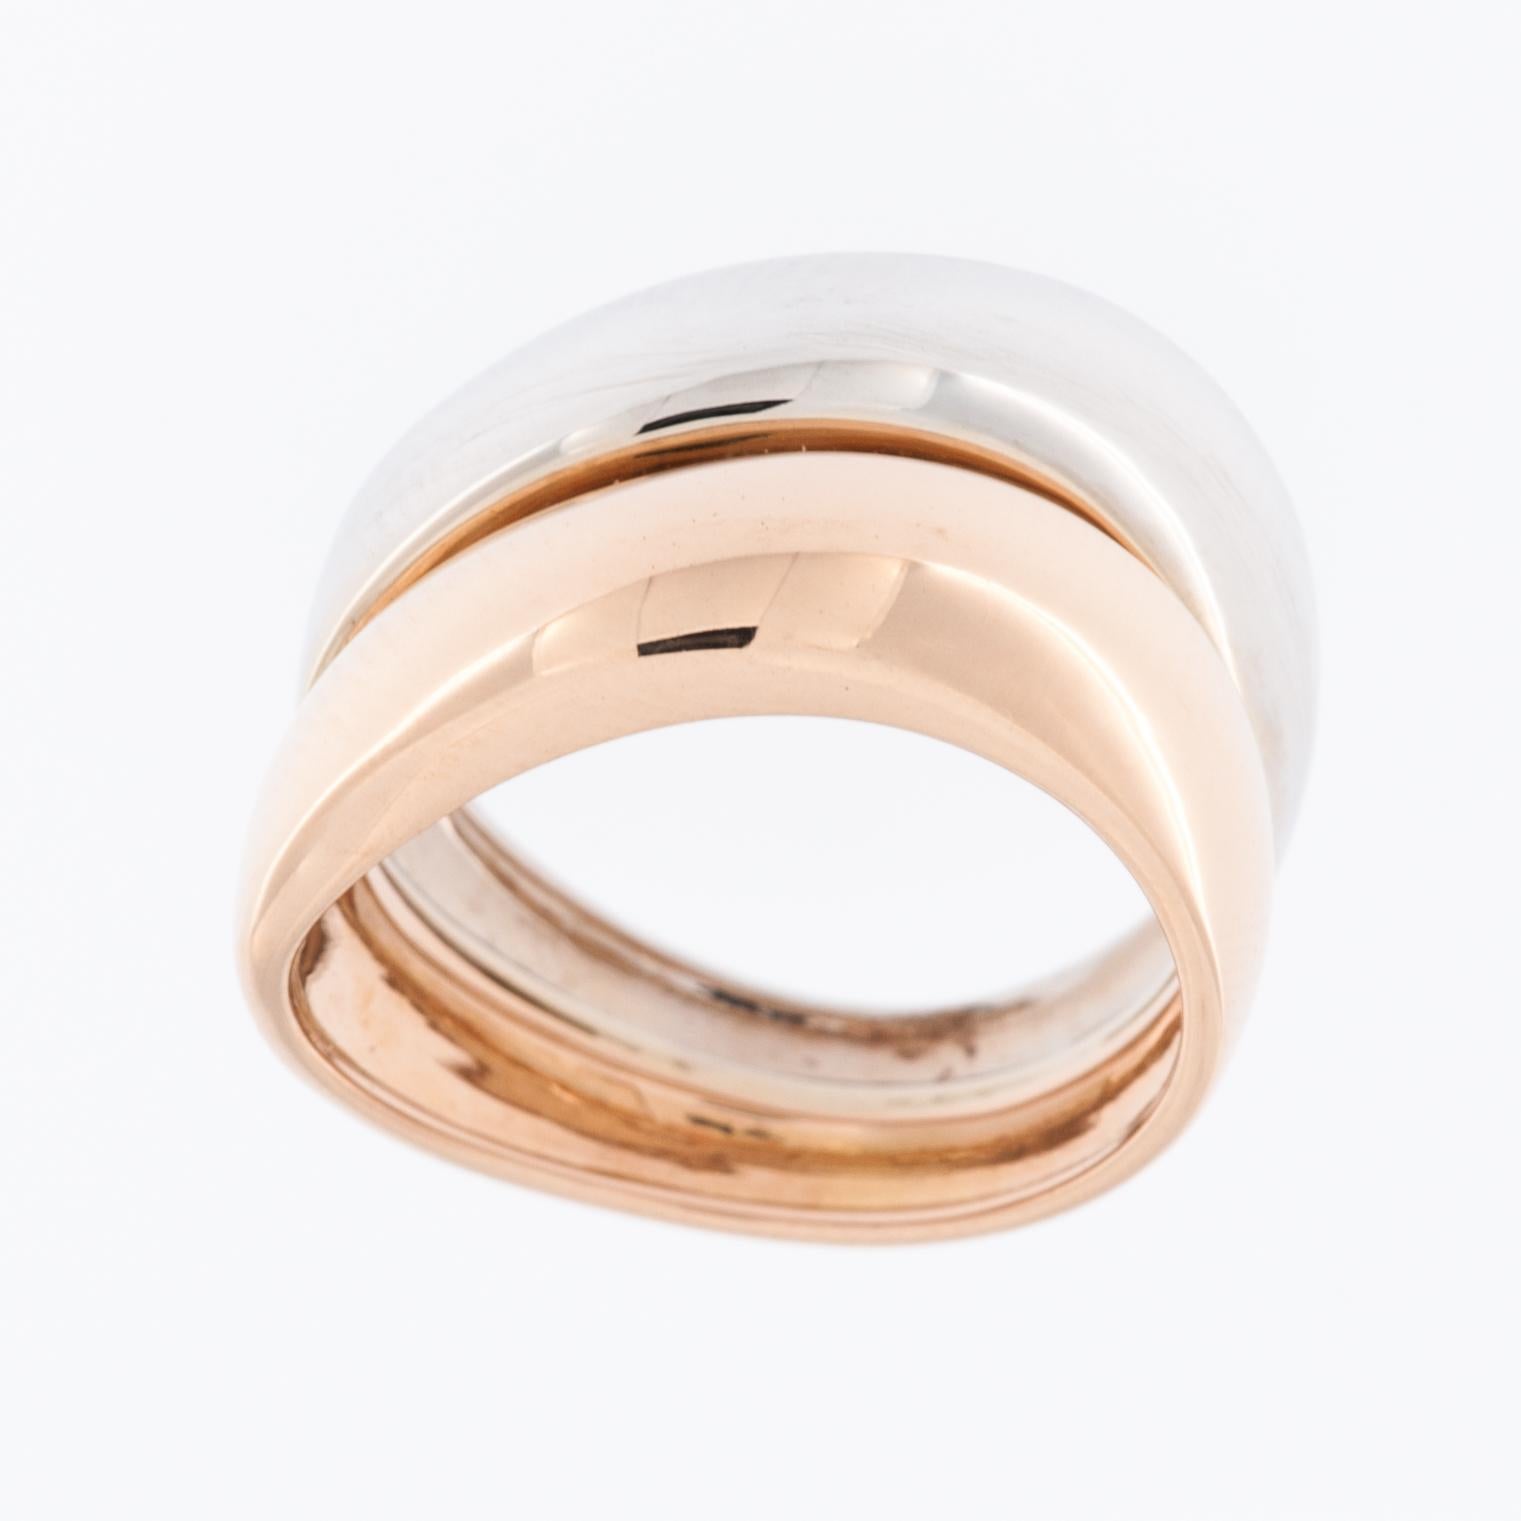 This modern italian ring has a special design thanks to its undulating shape which gives it an image of movement. 

This ring is crafted from high-quality 18-karat (18kt) gold, which is known for its durability and luxurious appearance. It features